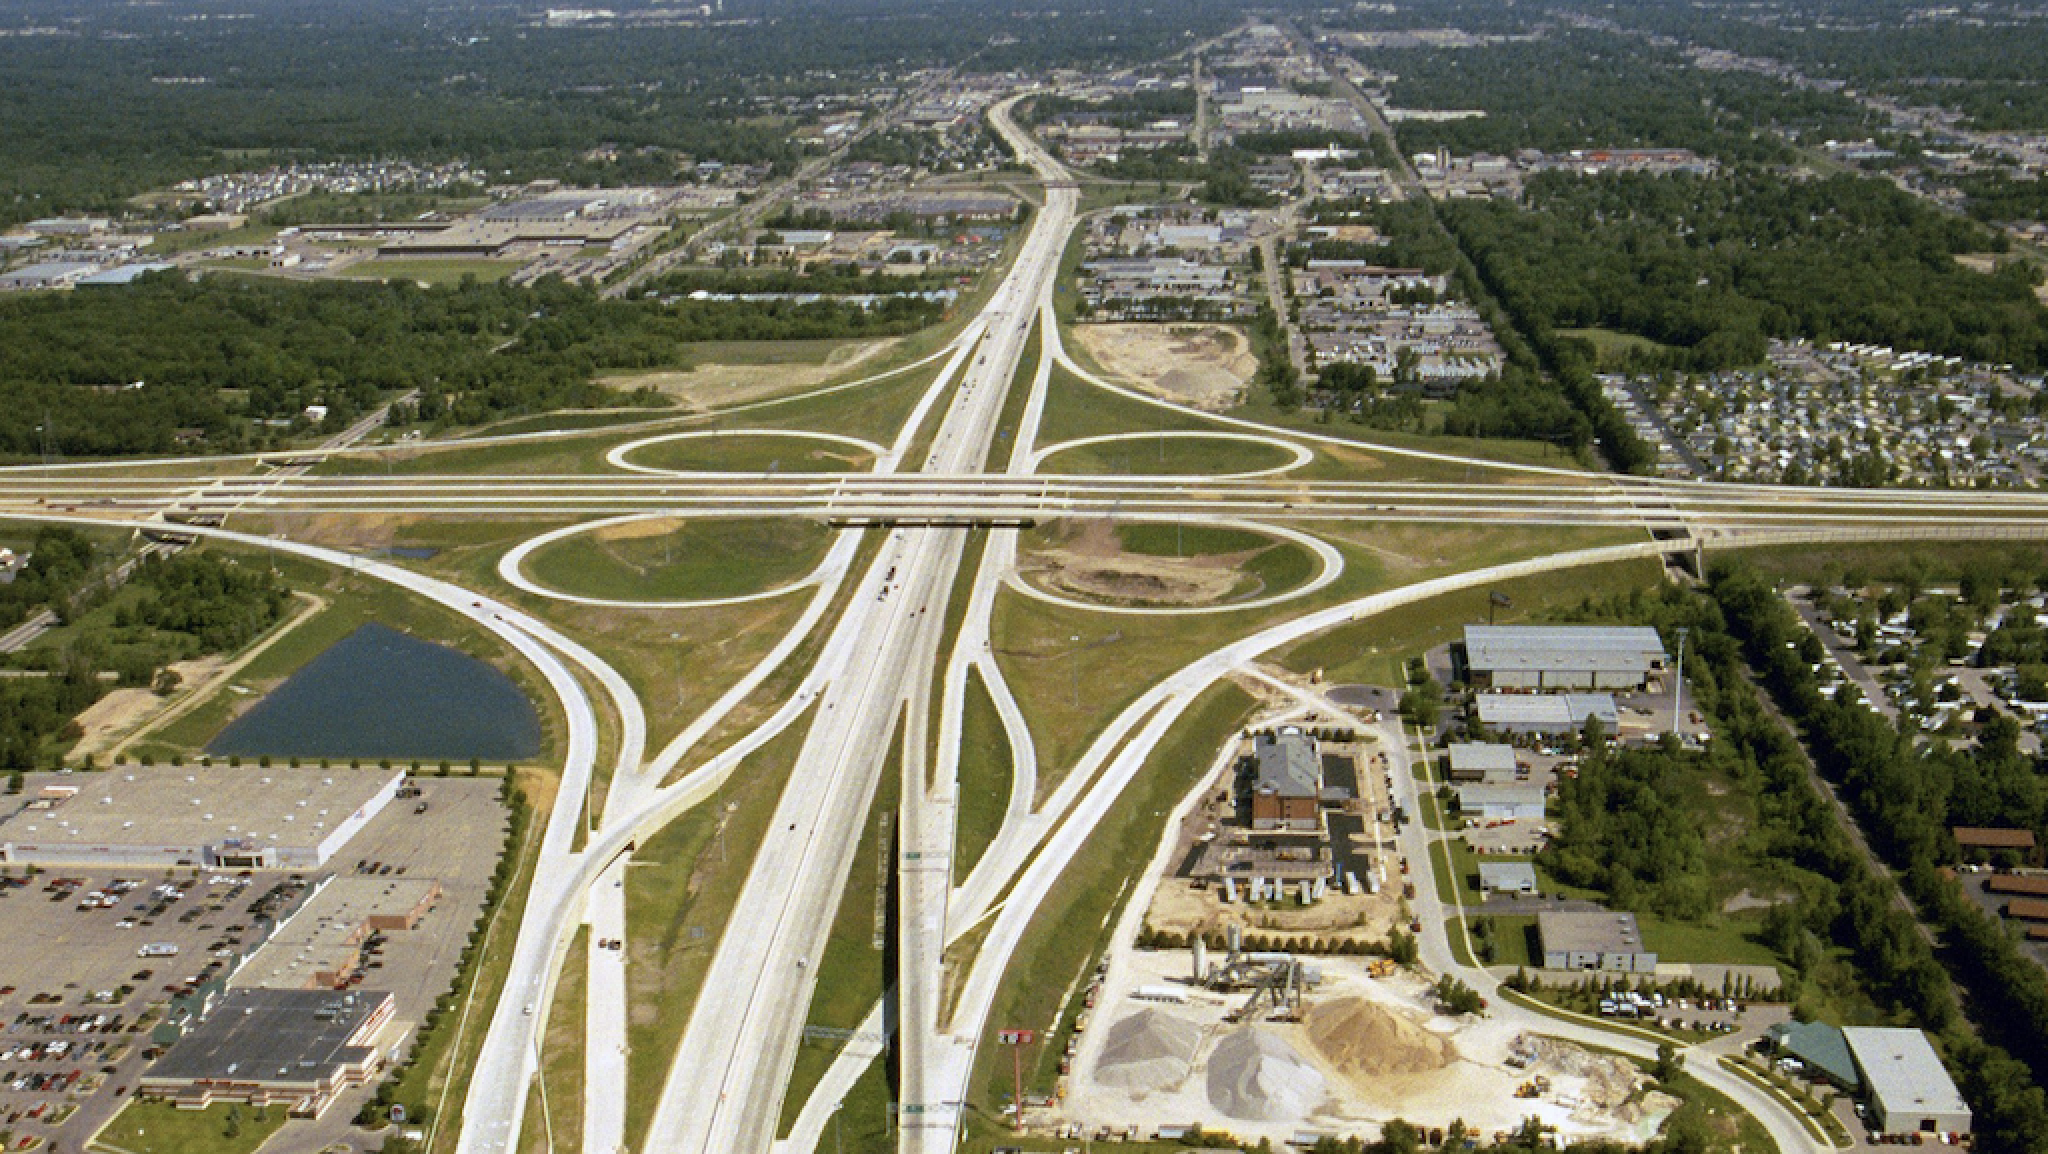 The cloverleaf interchange between US 131, M-6 and 68th Street in Cutlerville, Michigan, United States, shows many of the features of controlled-access highways: entry and exit ramps, median strips for opposing traffic, no at-grade intersections and no direct access to properties.